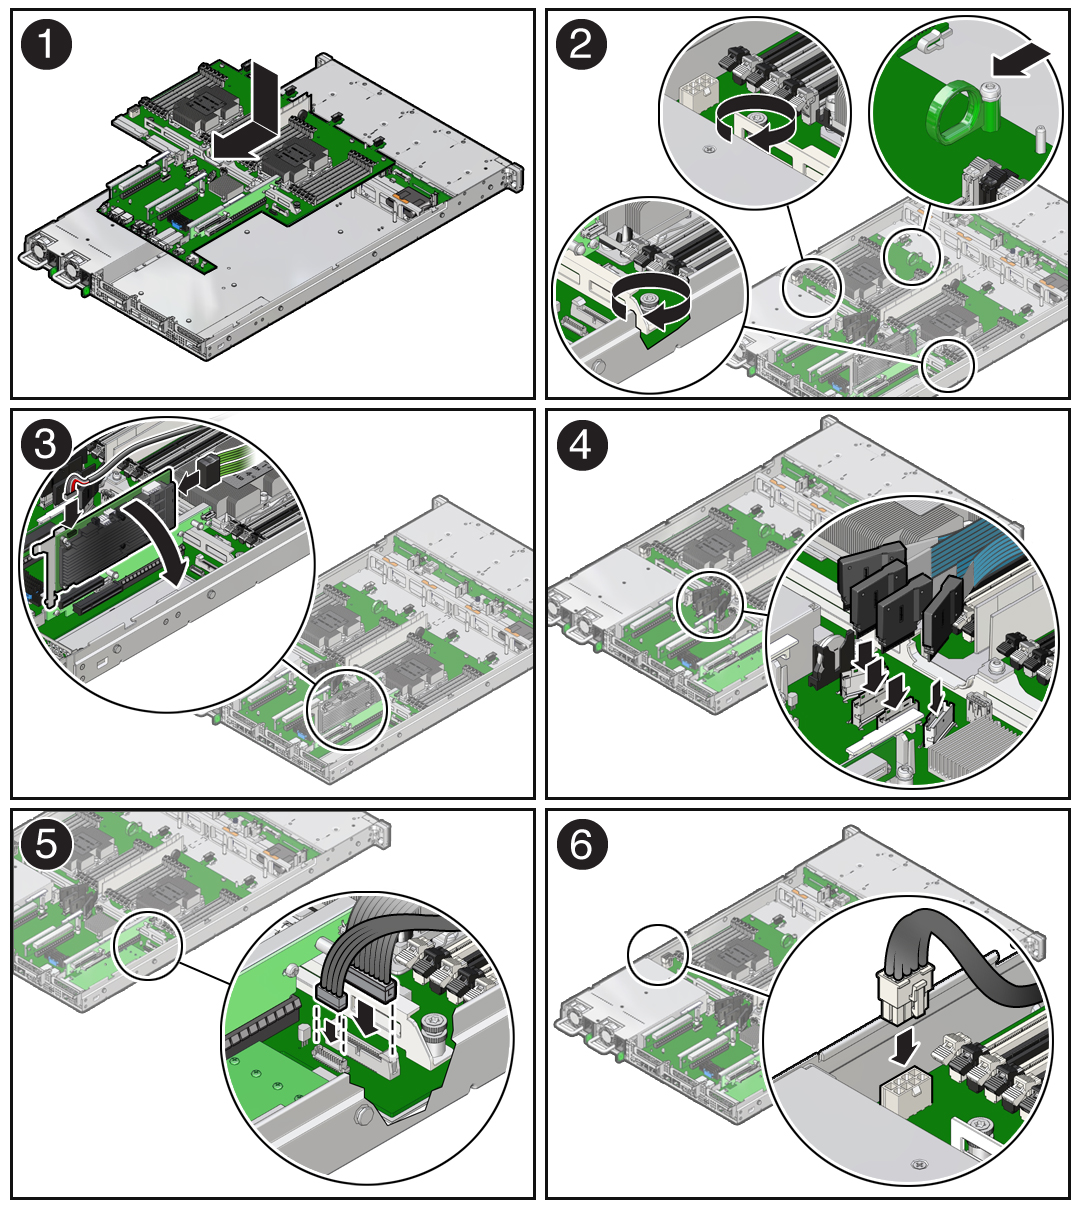 image:Figure showing how to installed the motherboard in to the                                     server.